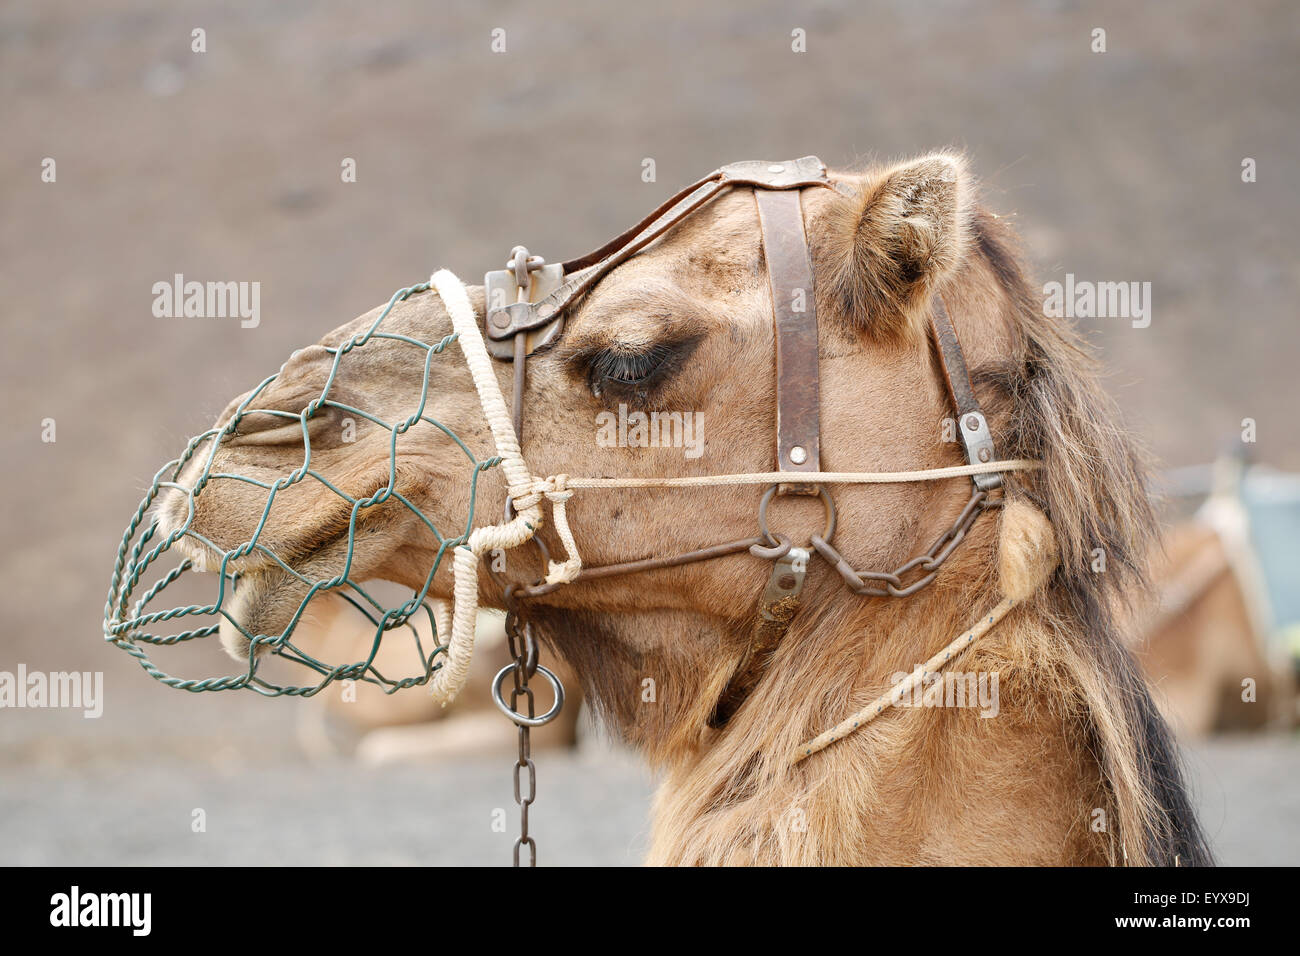 a close up view of a dromedary camel, camelus dromedarius,  wearing a metal spit guard. he is one of a train of working camels in Lanzarote, Spain Stock Photo